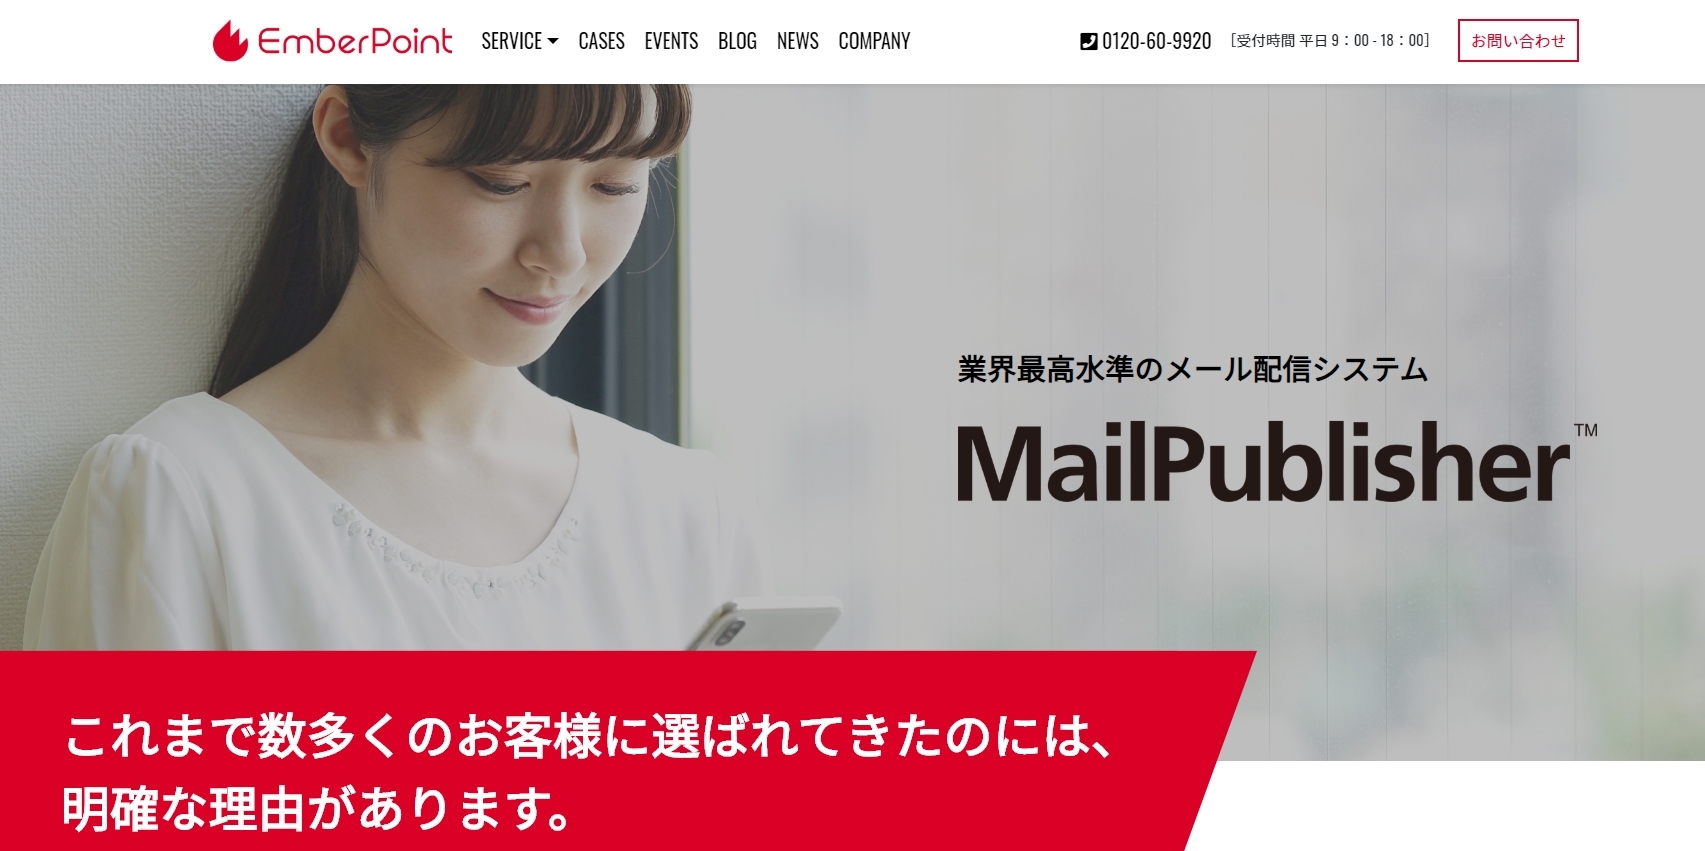 mail publisher